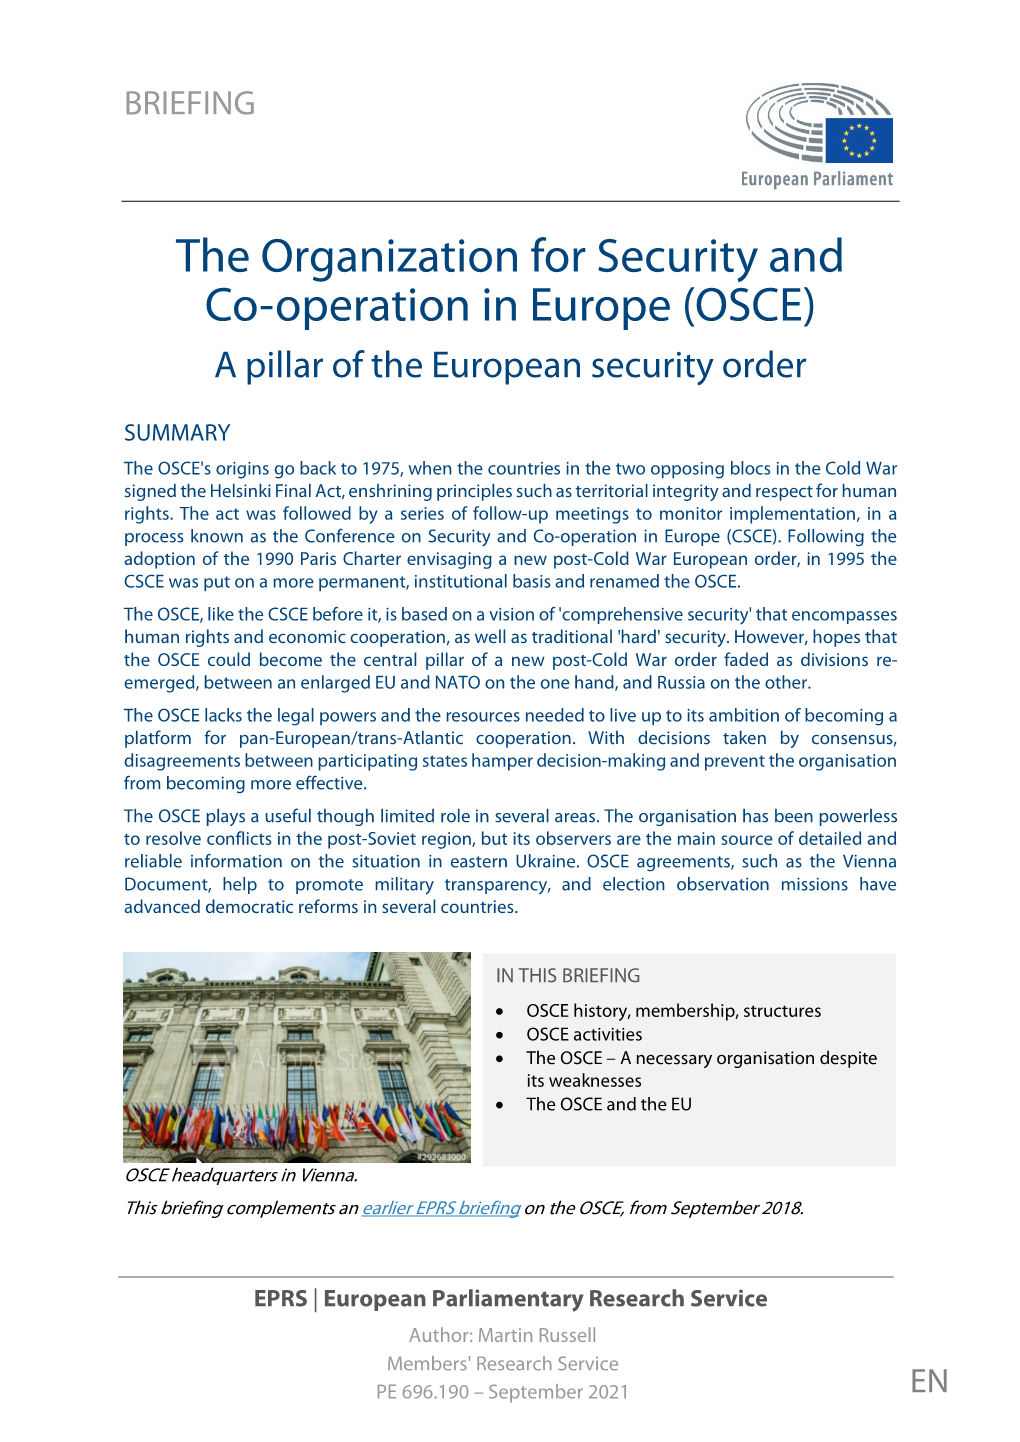 The Organization for Security and Co-Operation in Europe (OSCE) a Pillar of the European Security Order